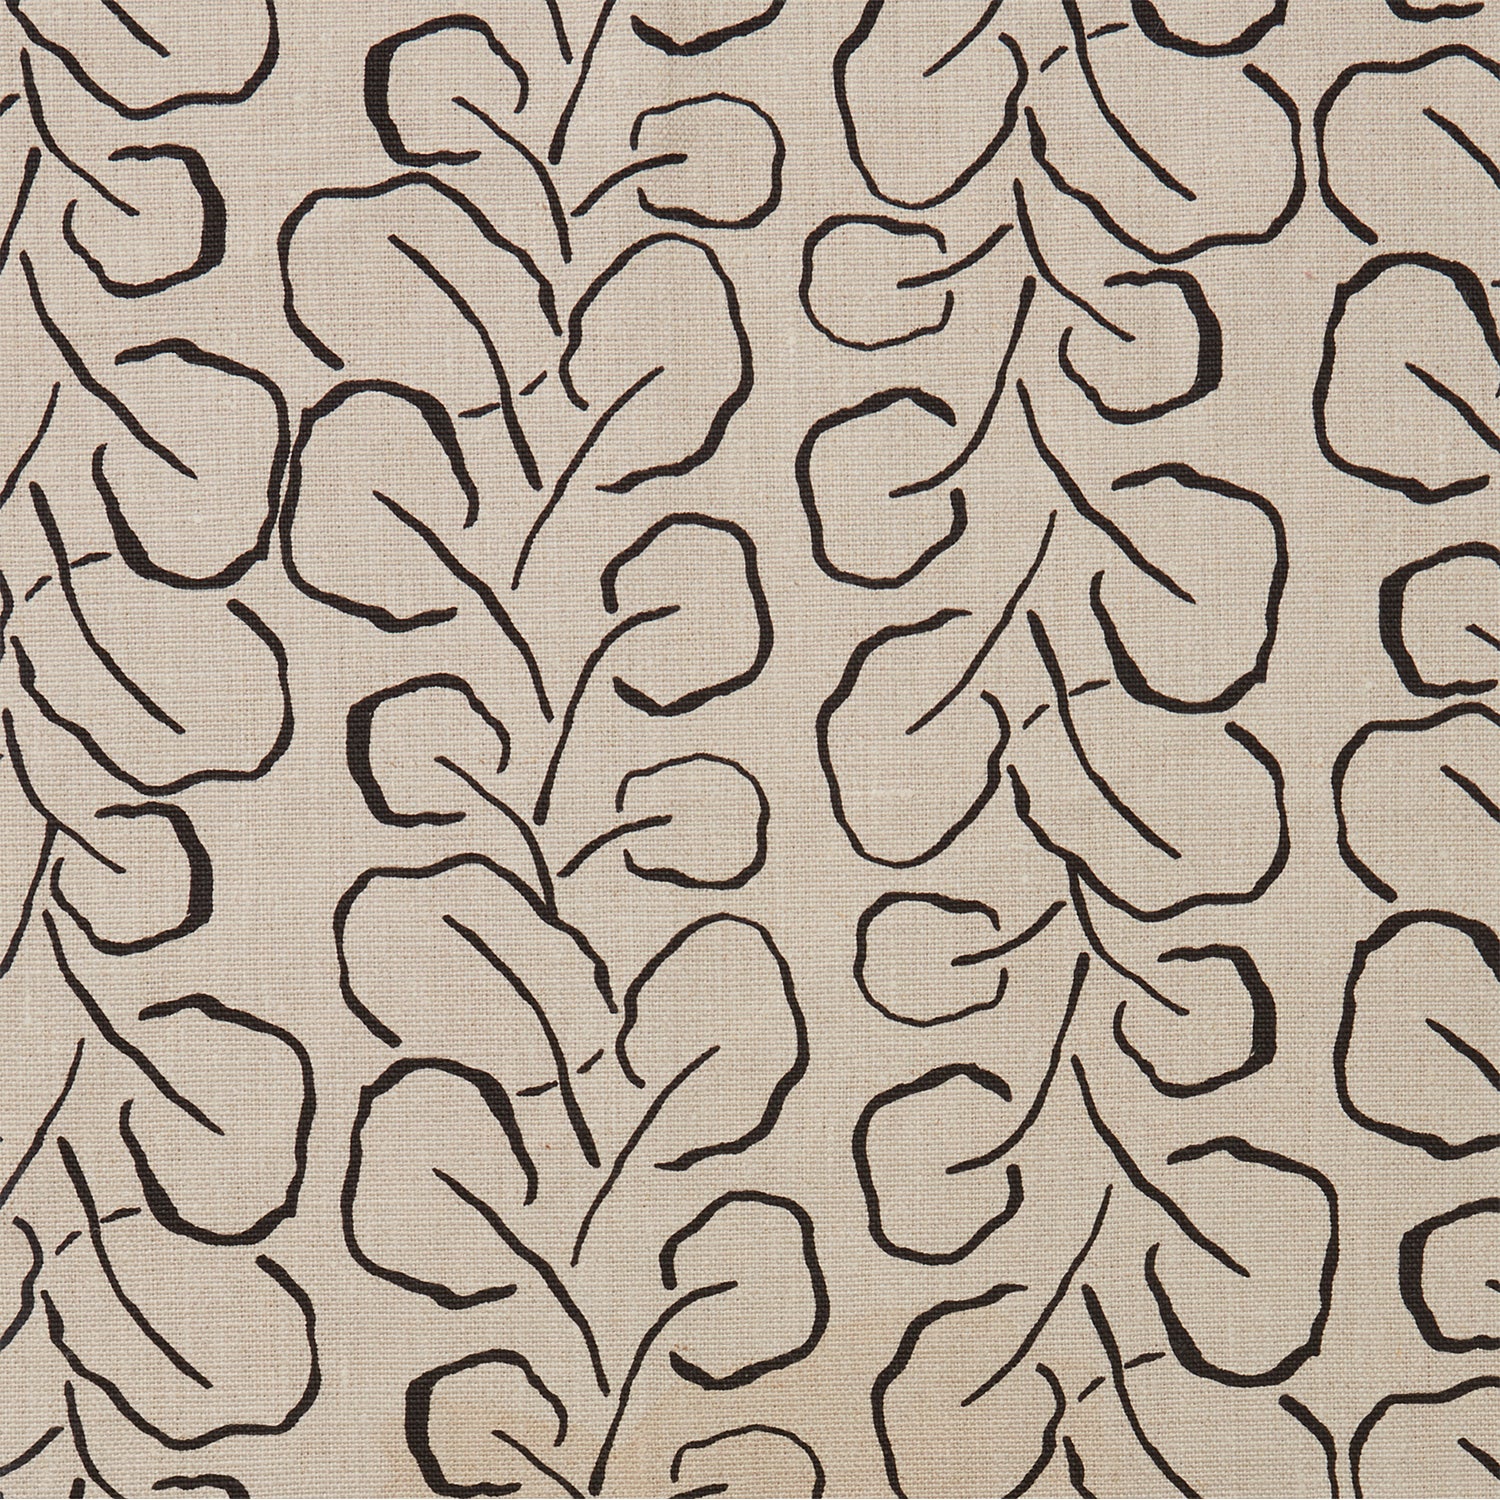 Woven fabric swatch with a large-scale repeating leaf print in black on a tan background.